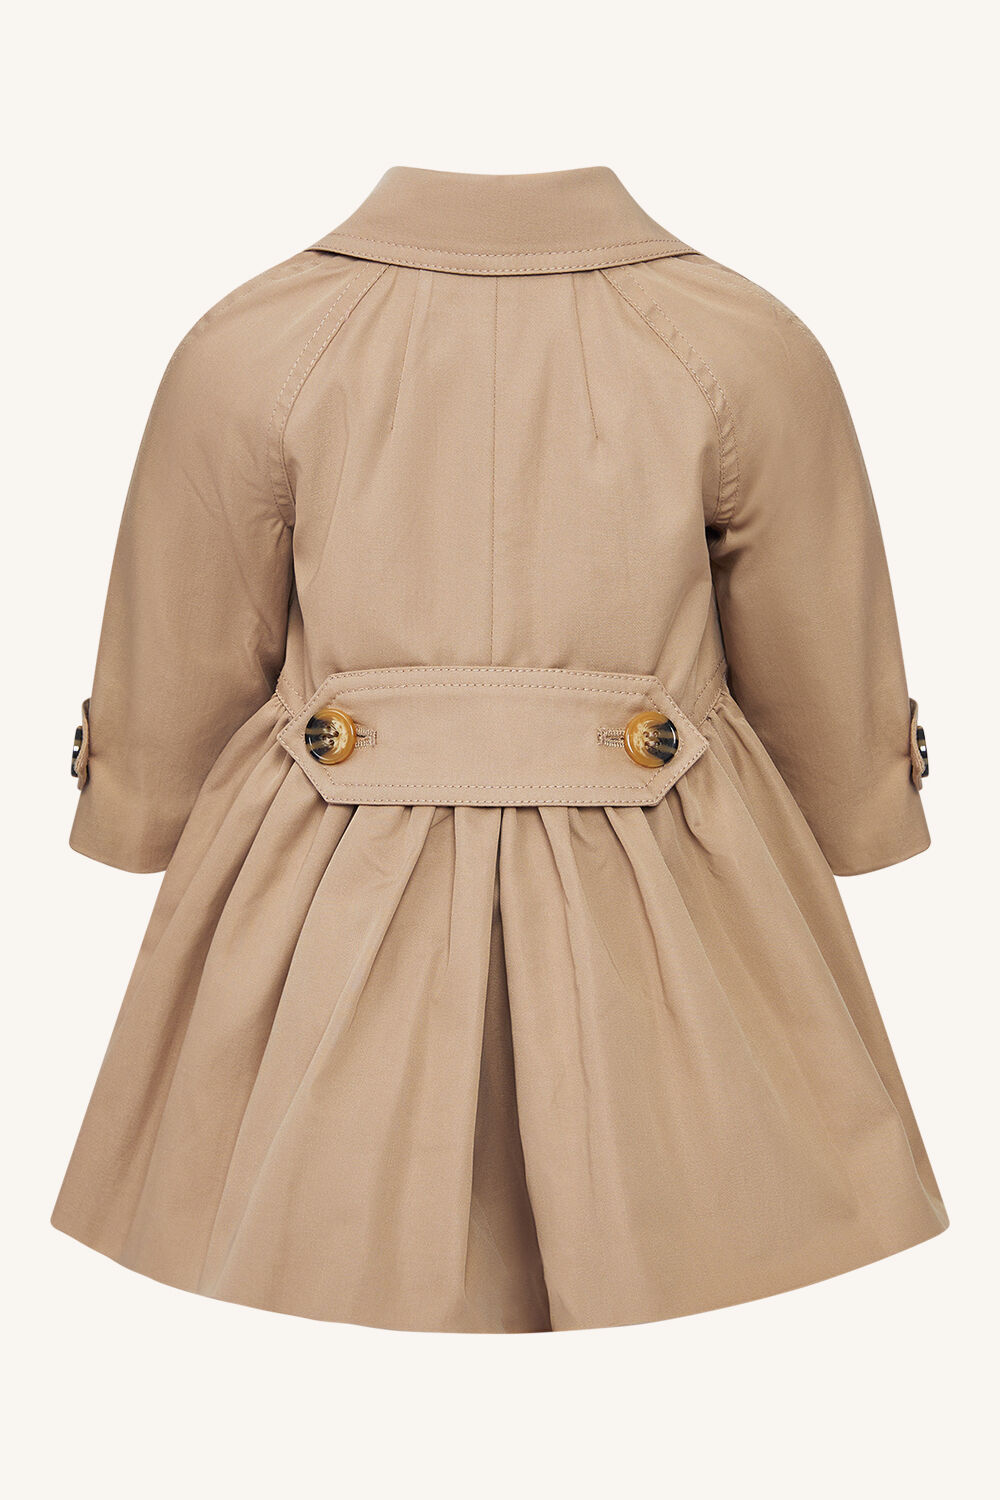 BABY GIRL MIA CLASSIC TRENCH in colour TAN